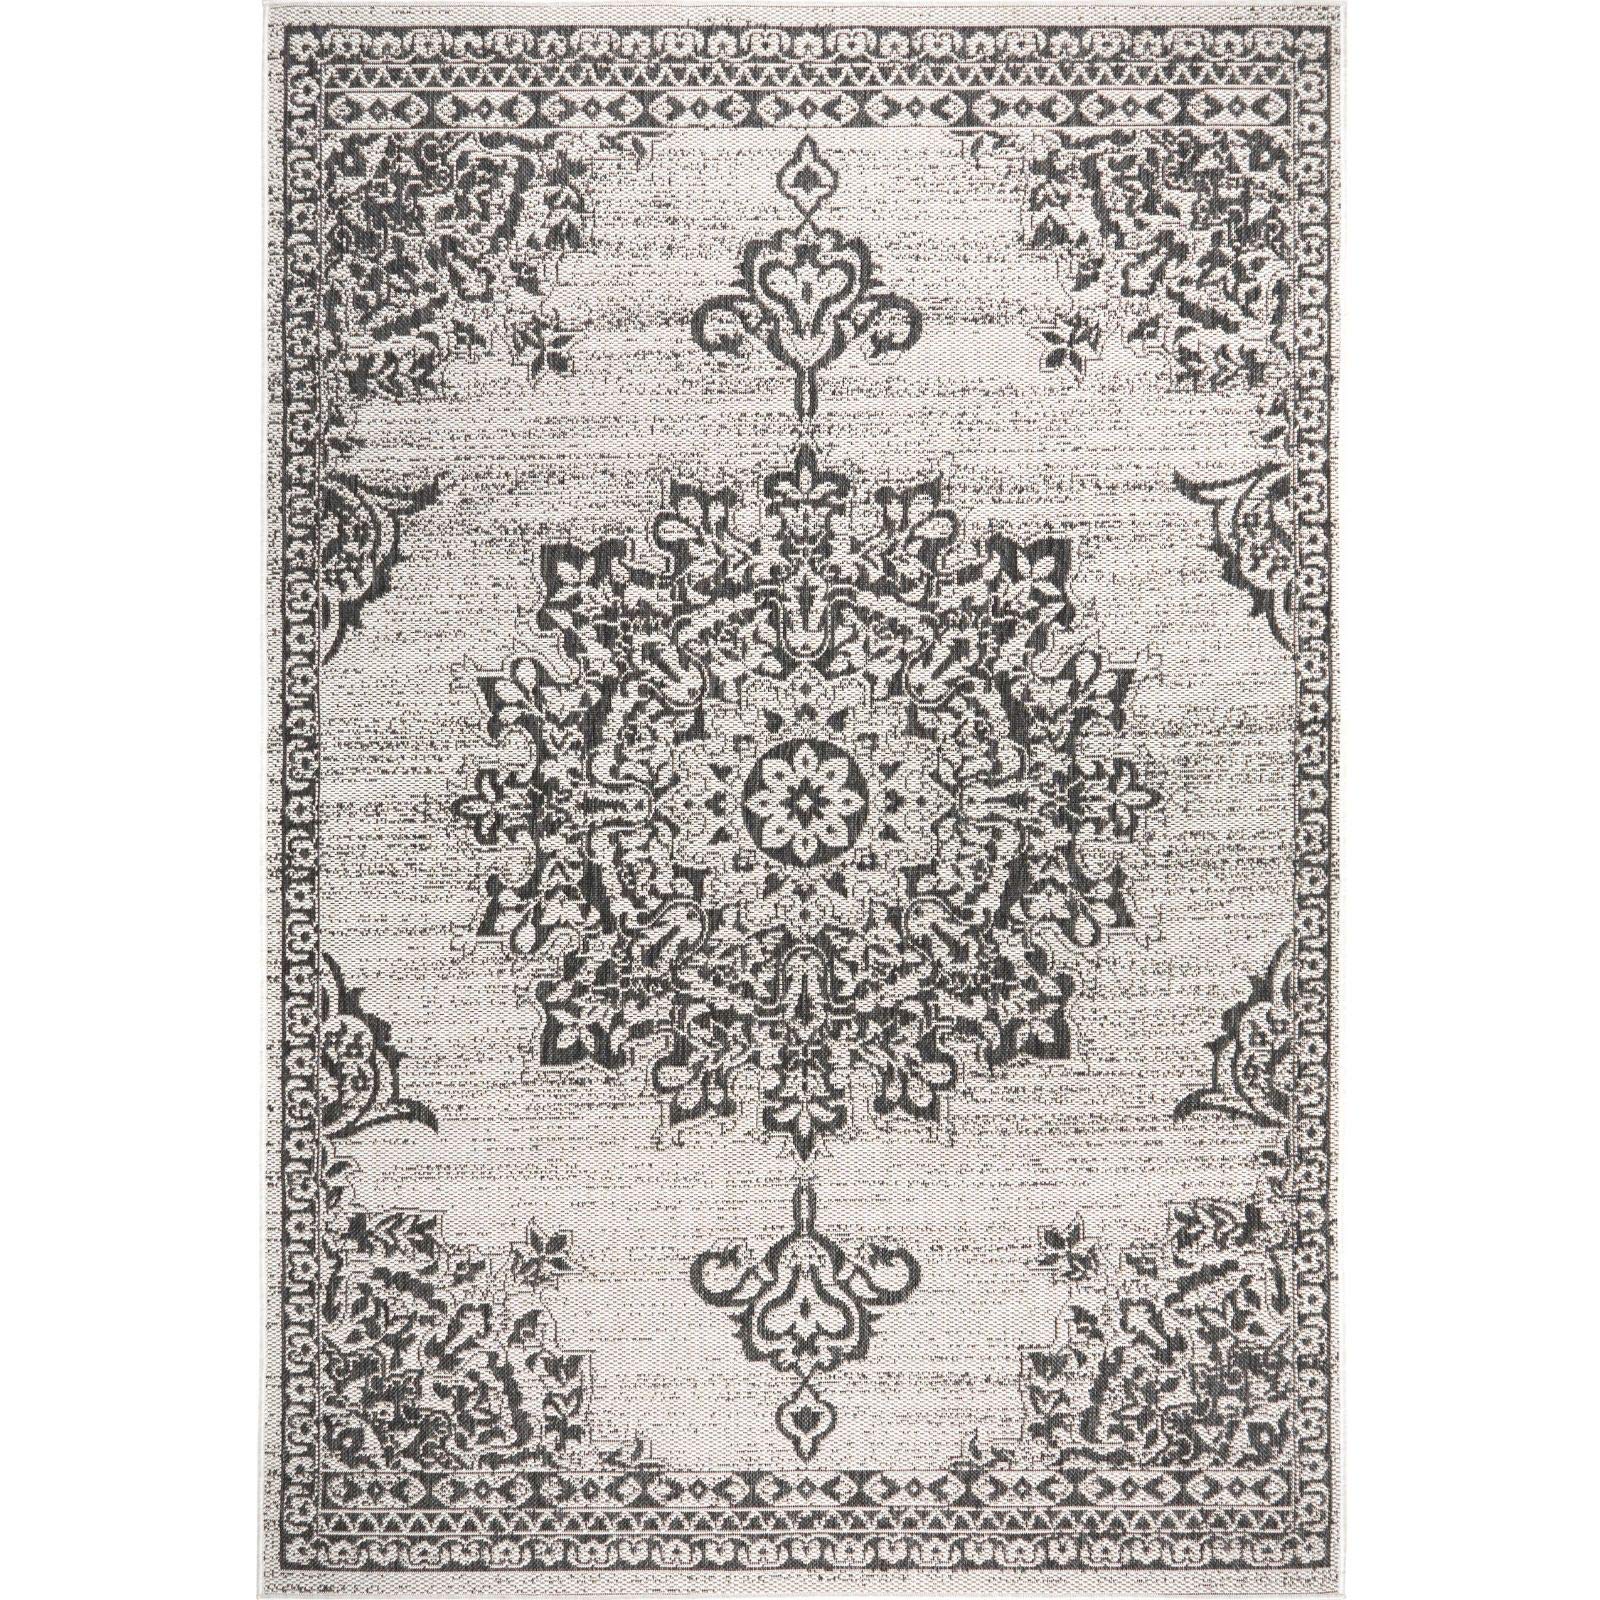 5'2"x7'2" Nicole Miller New York Patio Country Azalea Transitional Medallion Indoor/Outdoor Area Rug (Grey/Black) $18 + Free Shipping w/ Prime or on $25+